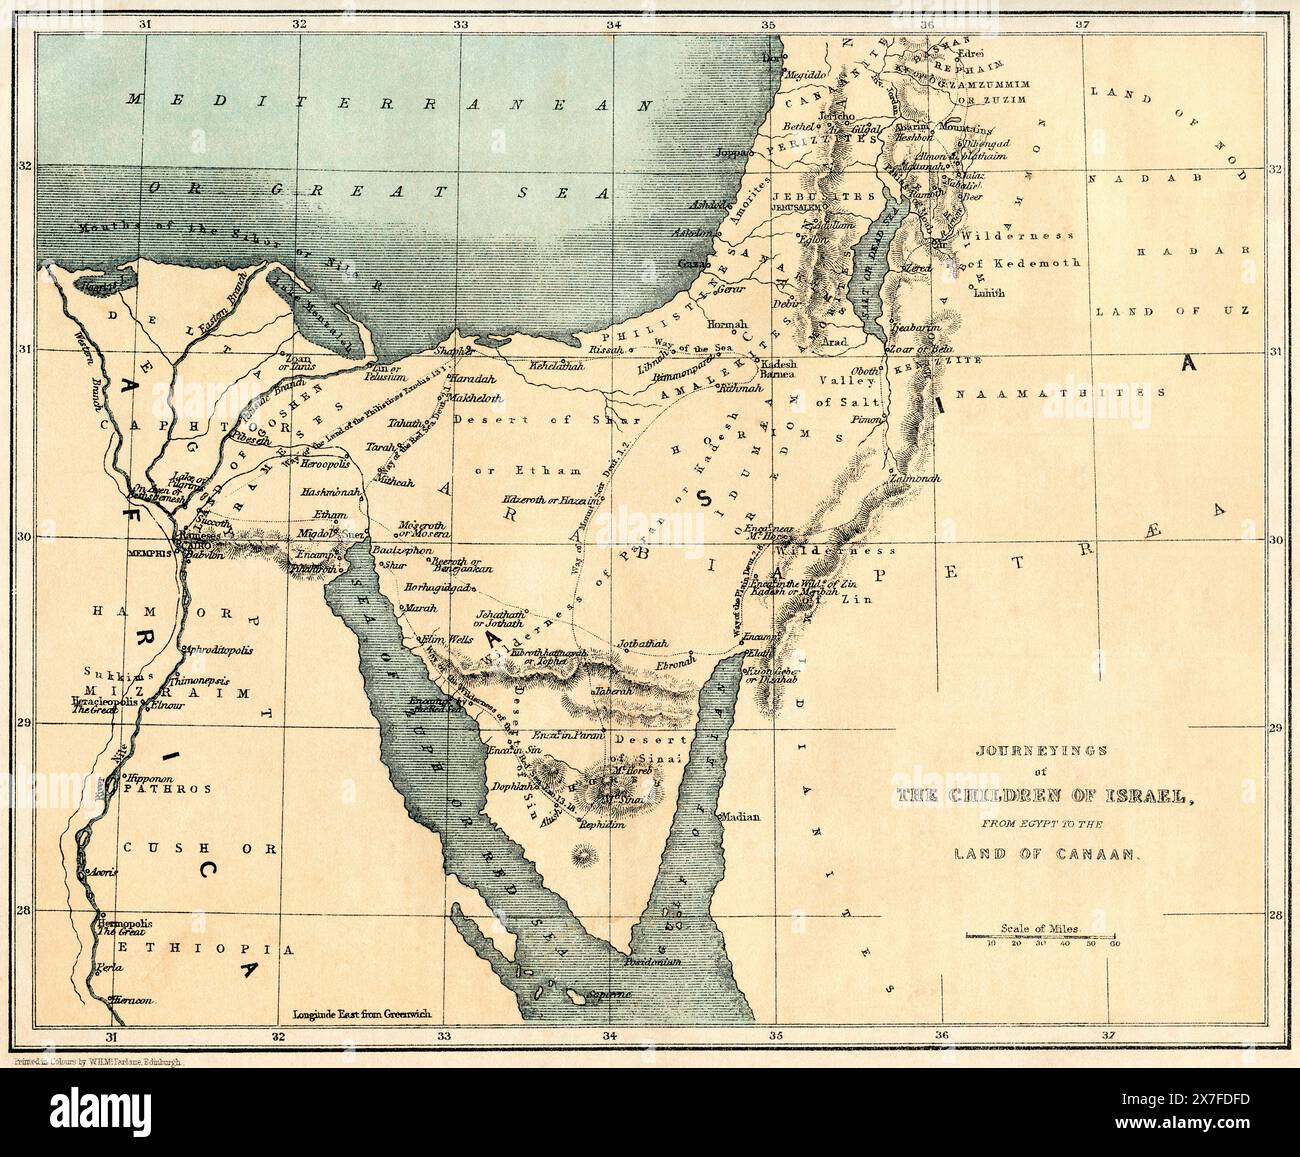 19th century map showing the Journeyings of The Children of Israel from Egypt to the Land of Canaan. Stock Photo